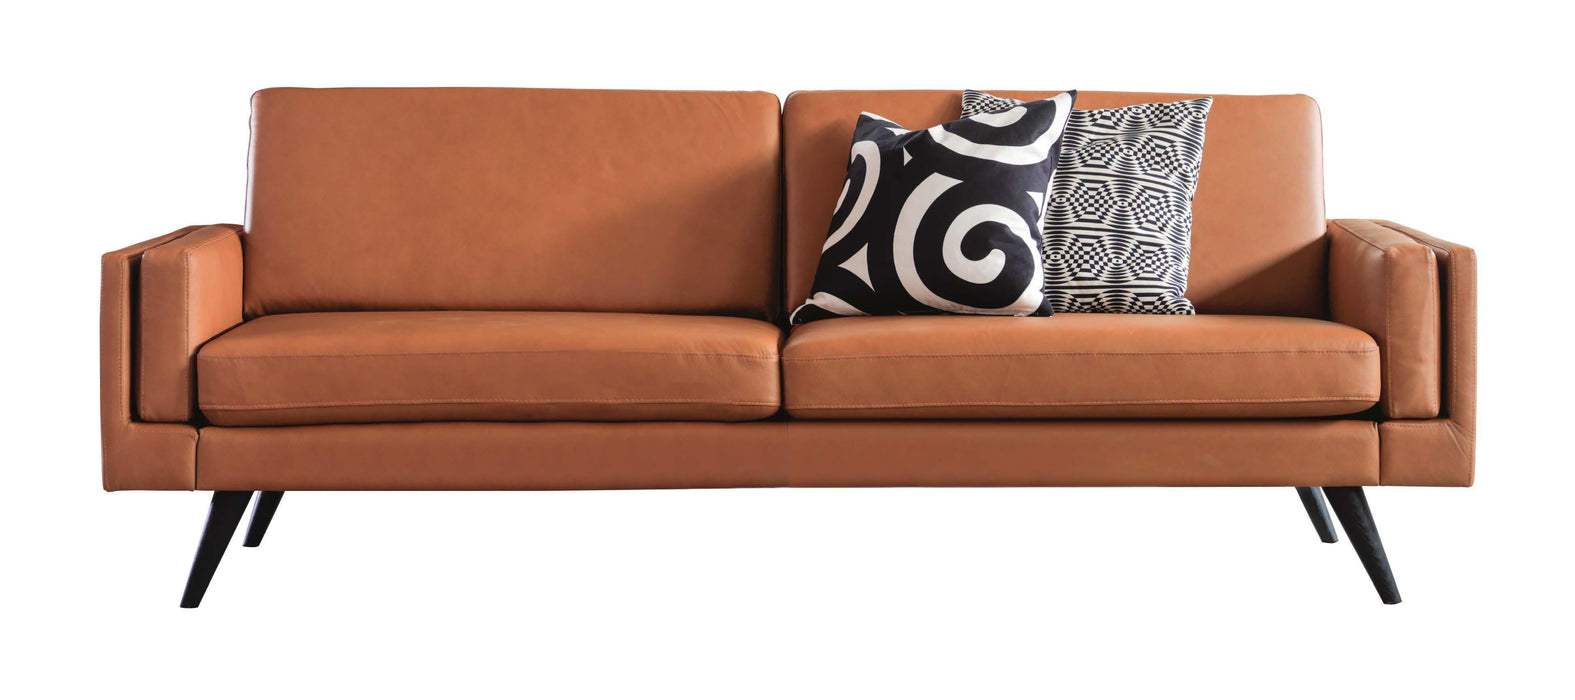 Norsk Collection 705439_US Sofa (3 Seat Duo) image